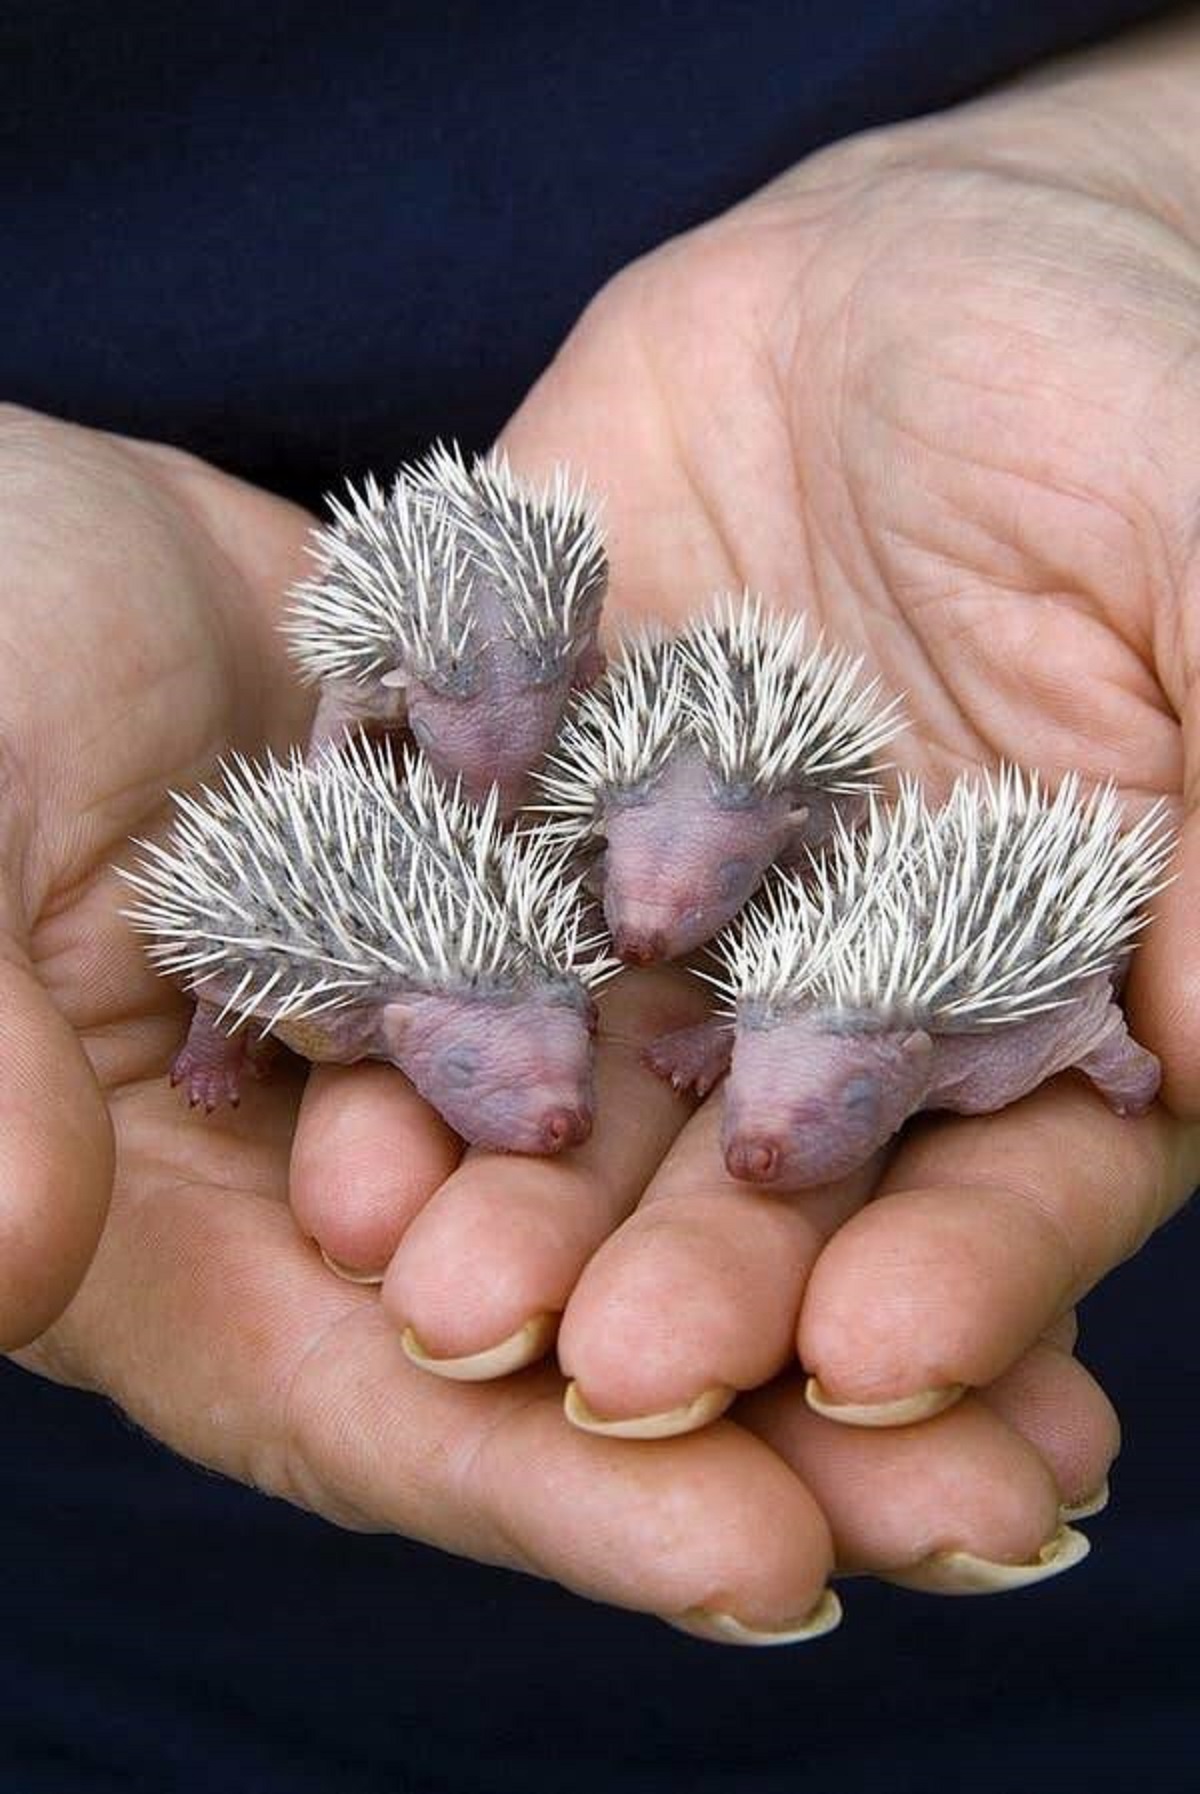 This is what baby hedgehogs look like: